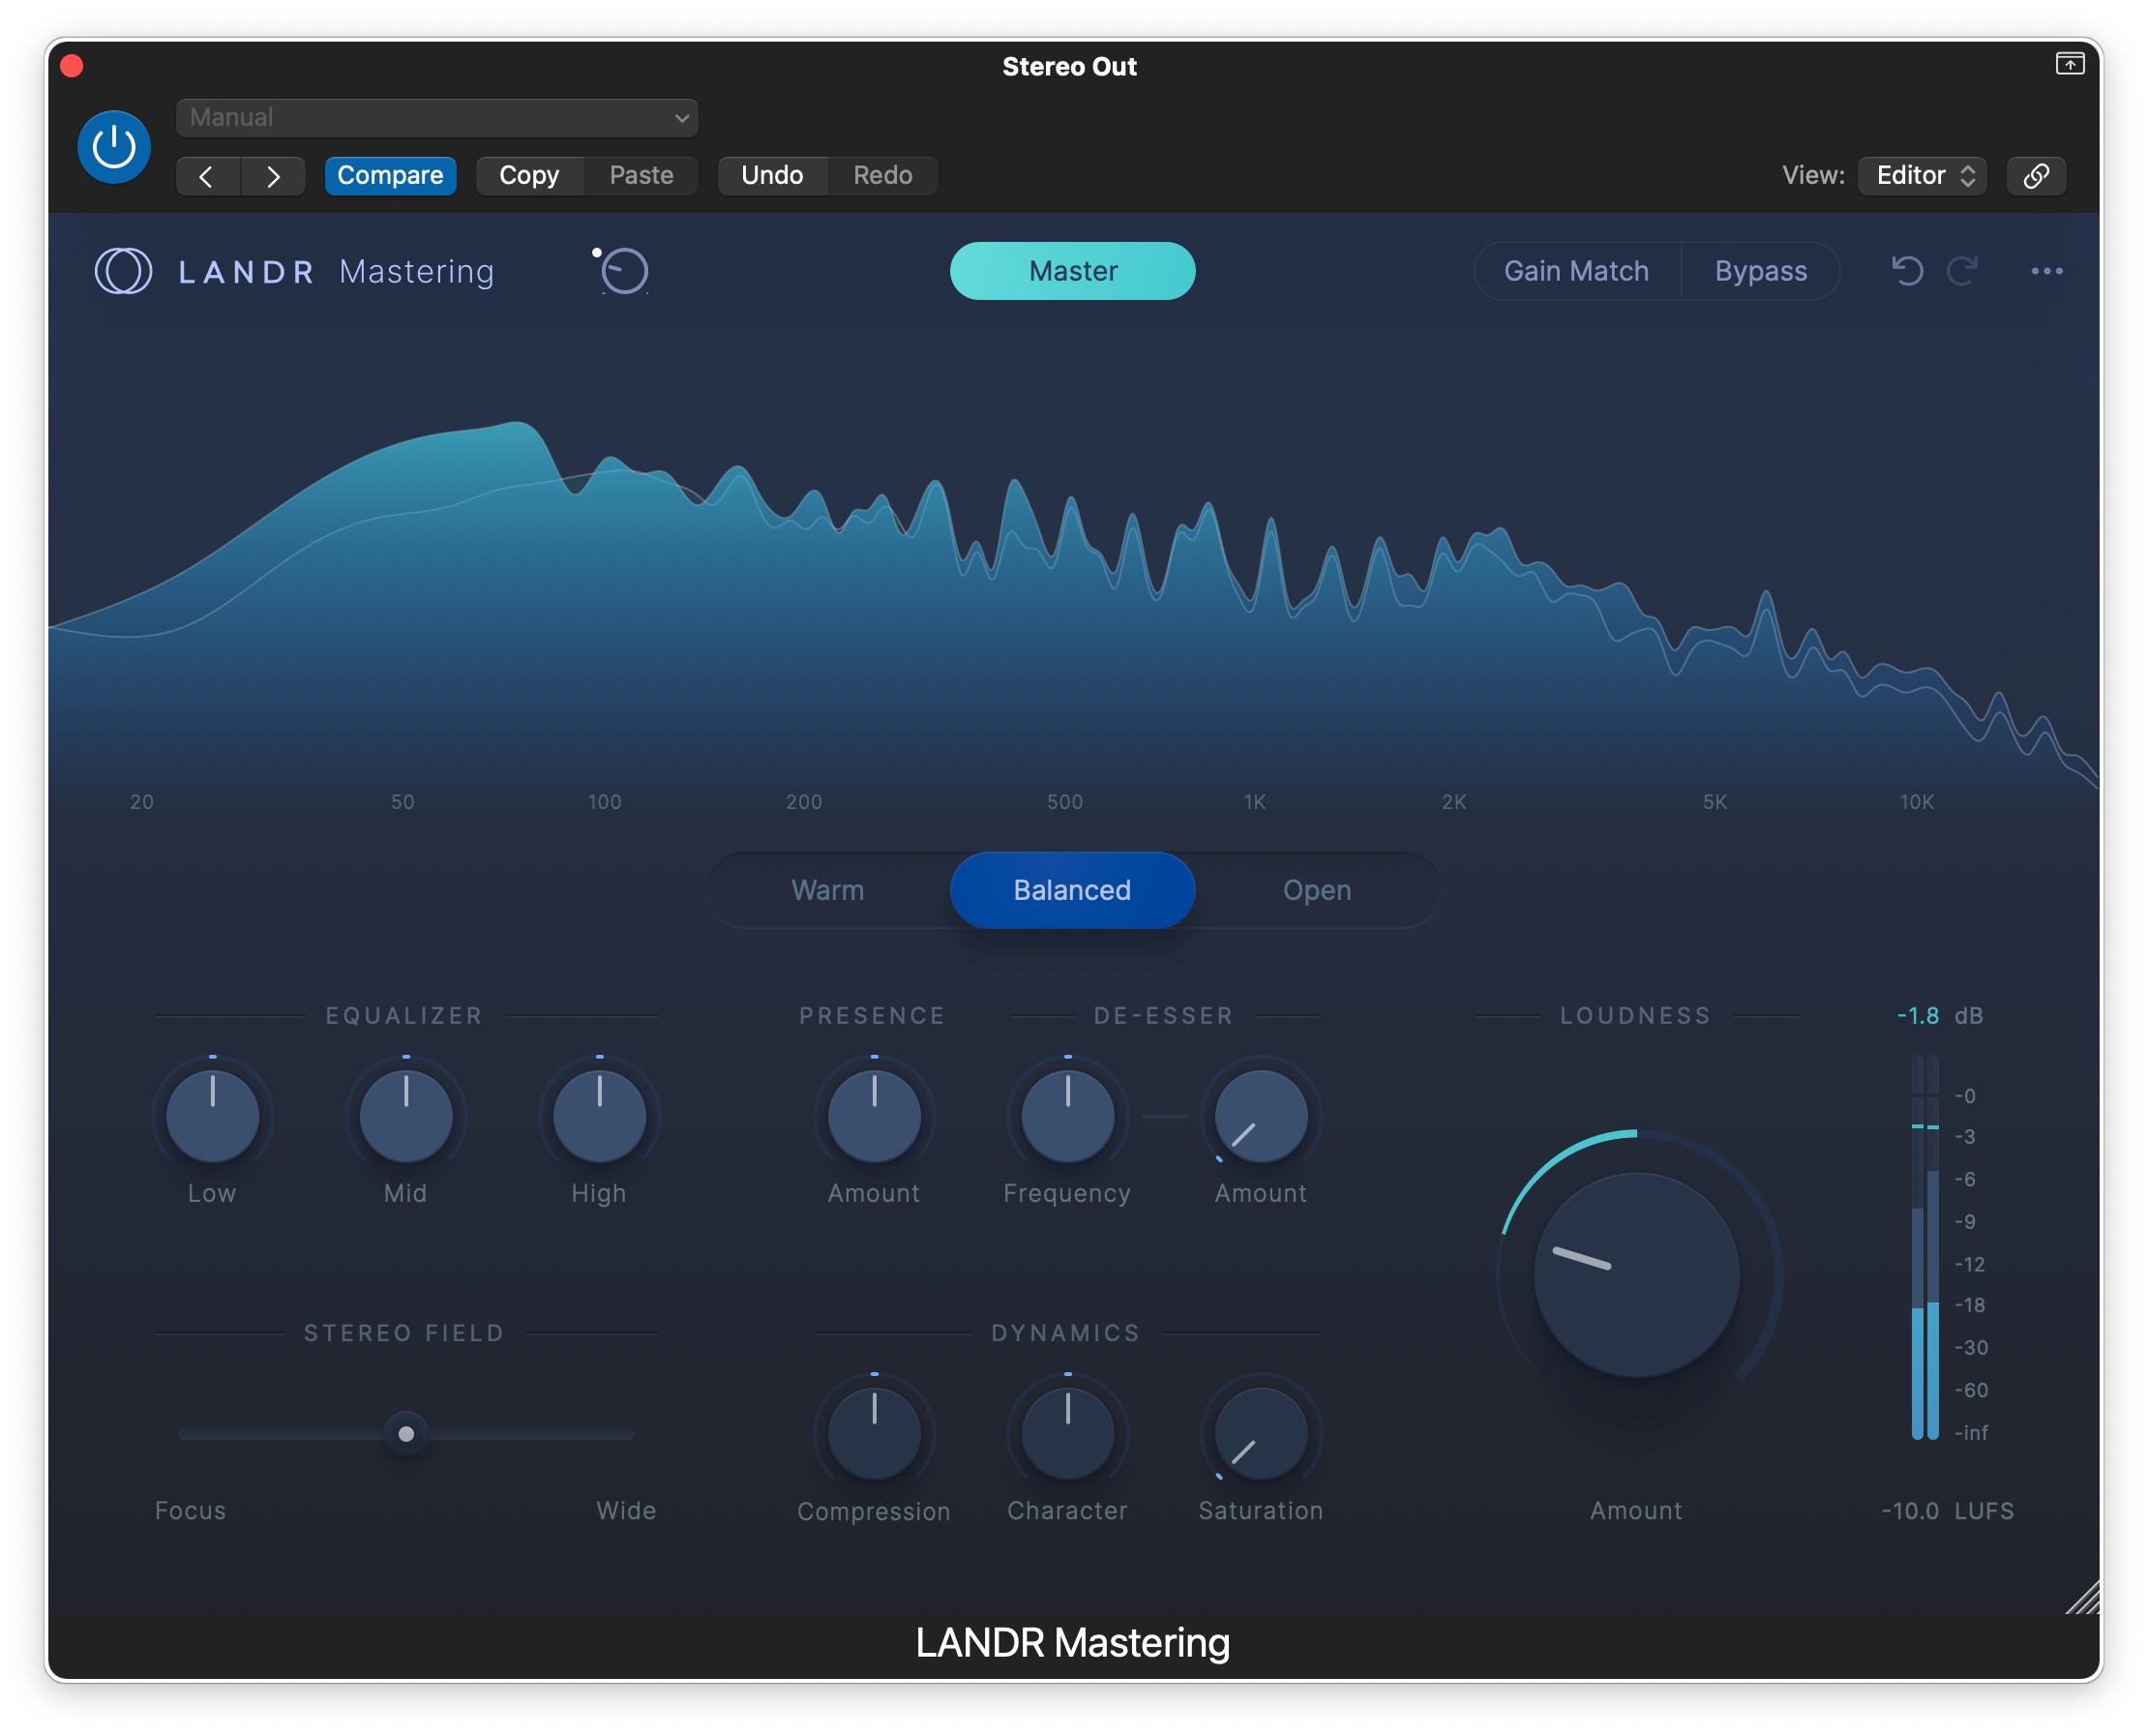 The LANDR Mastering user controls are simple but effective.